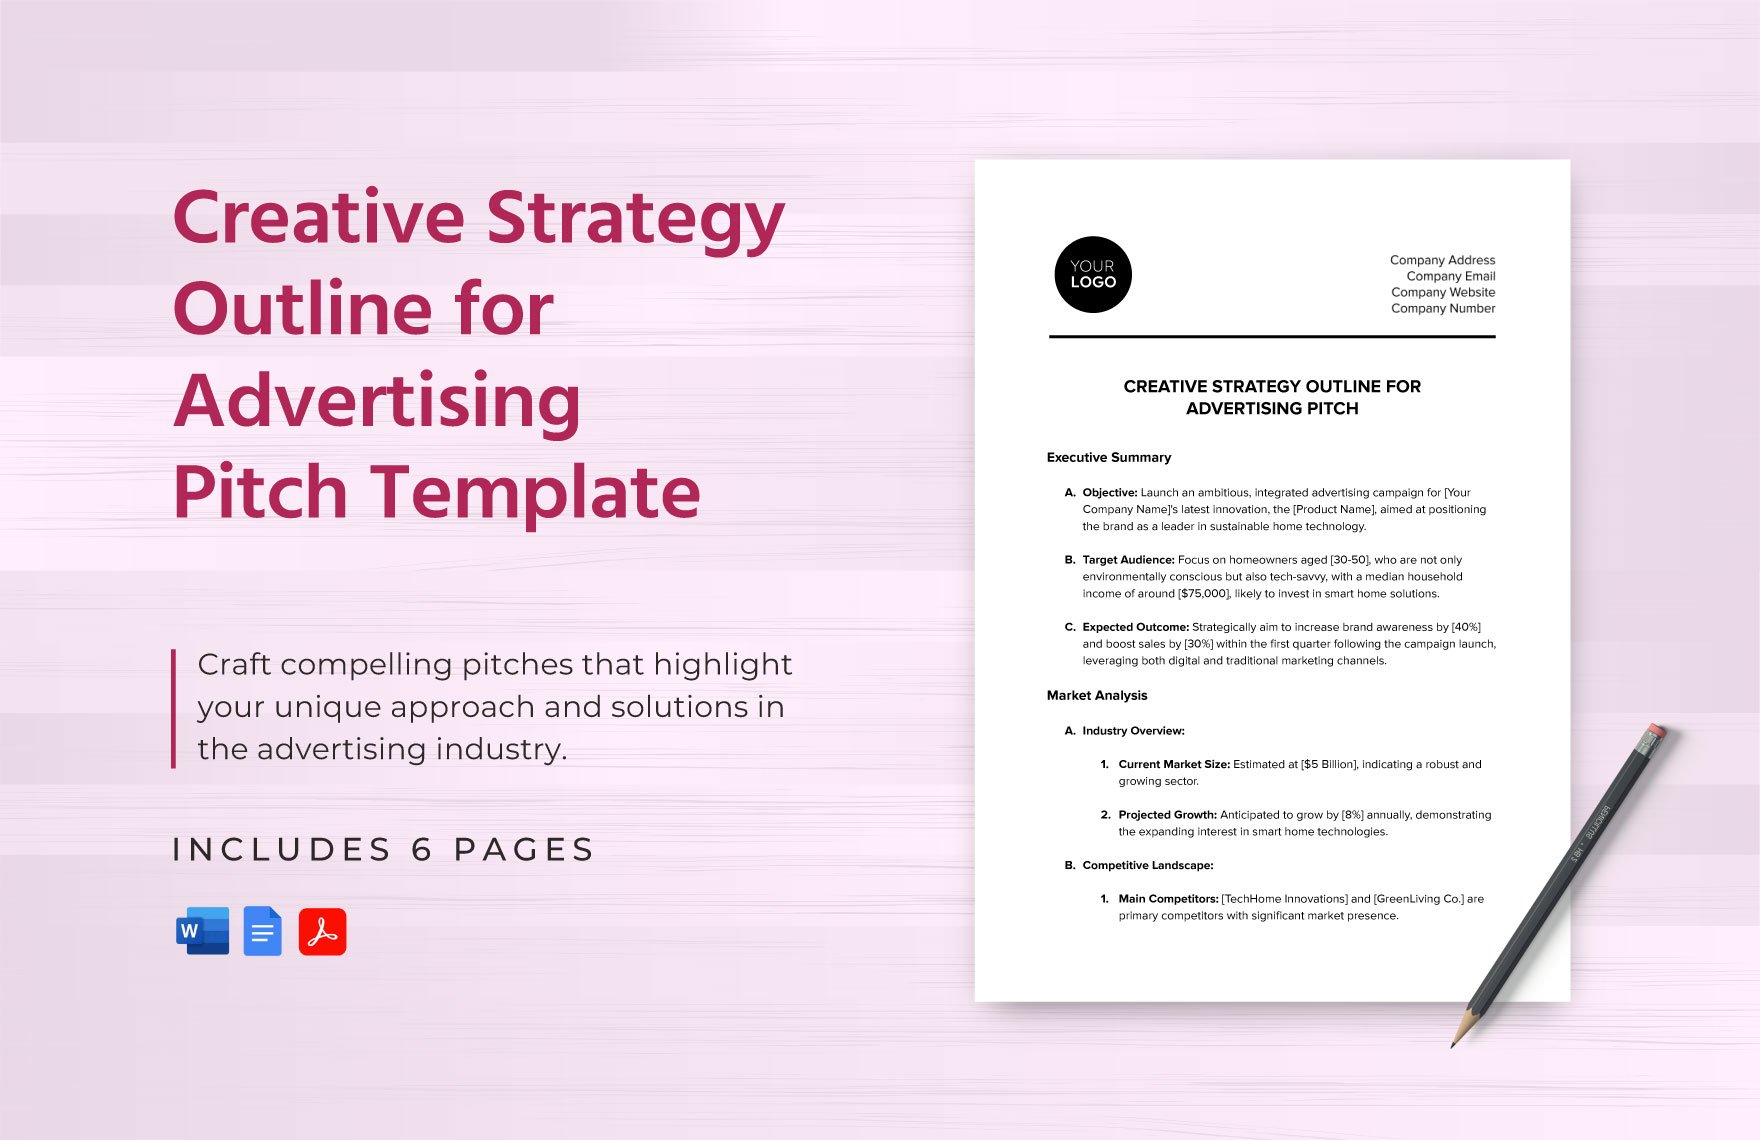 Creative Strategy Outline for Advertising Pitch Template